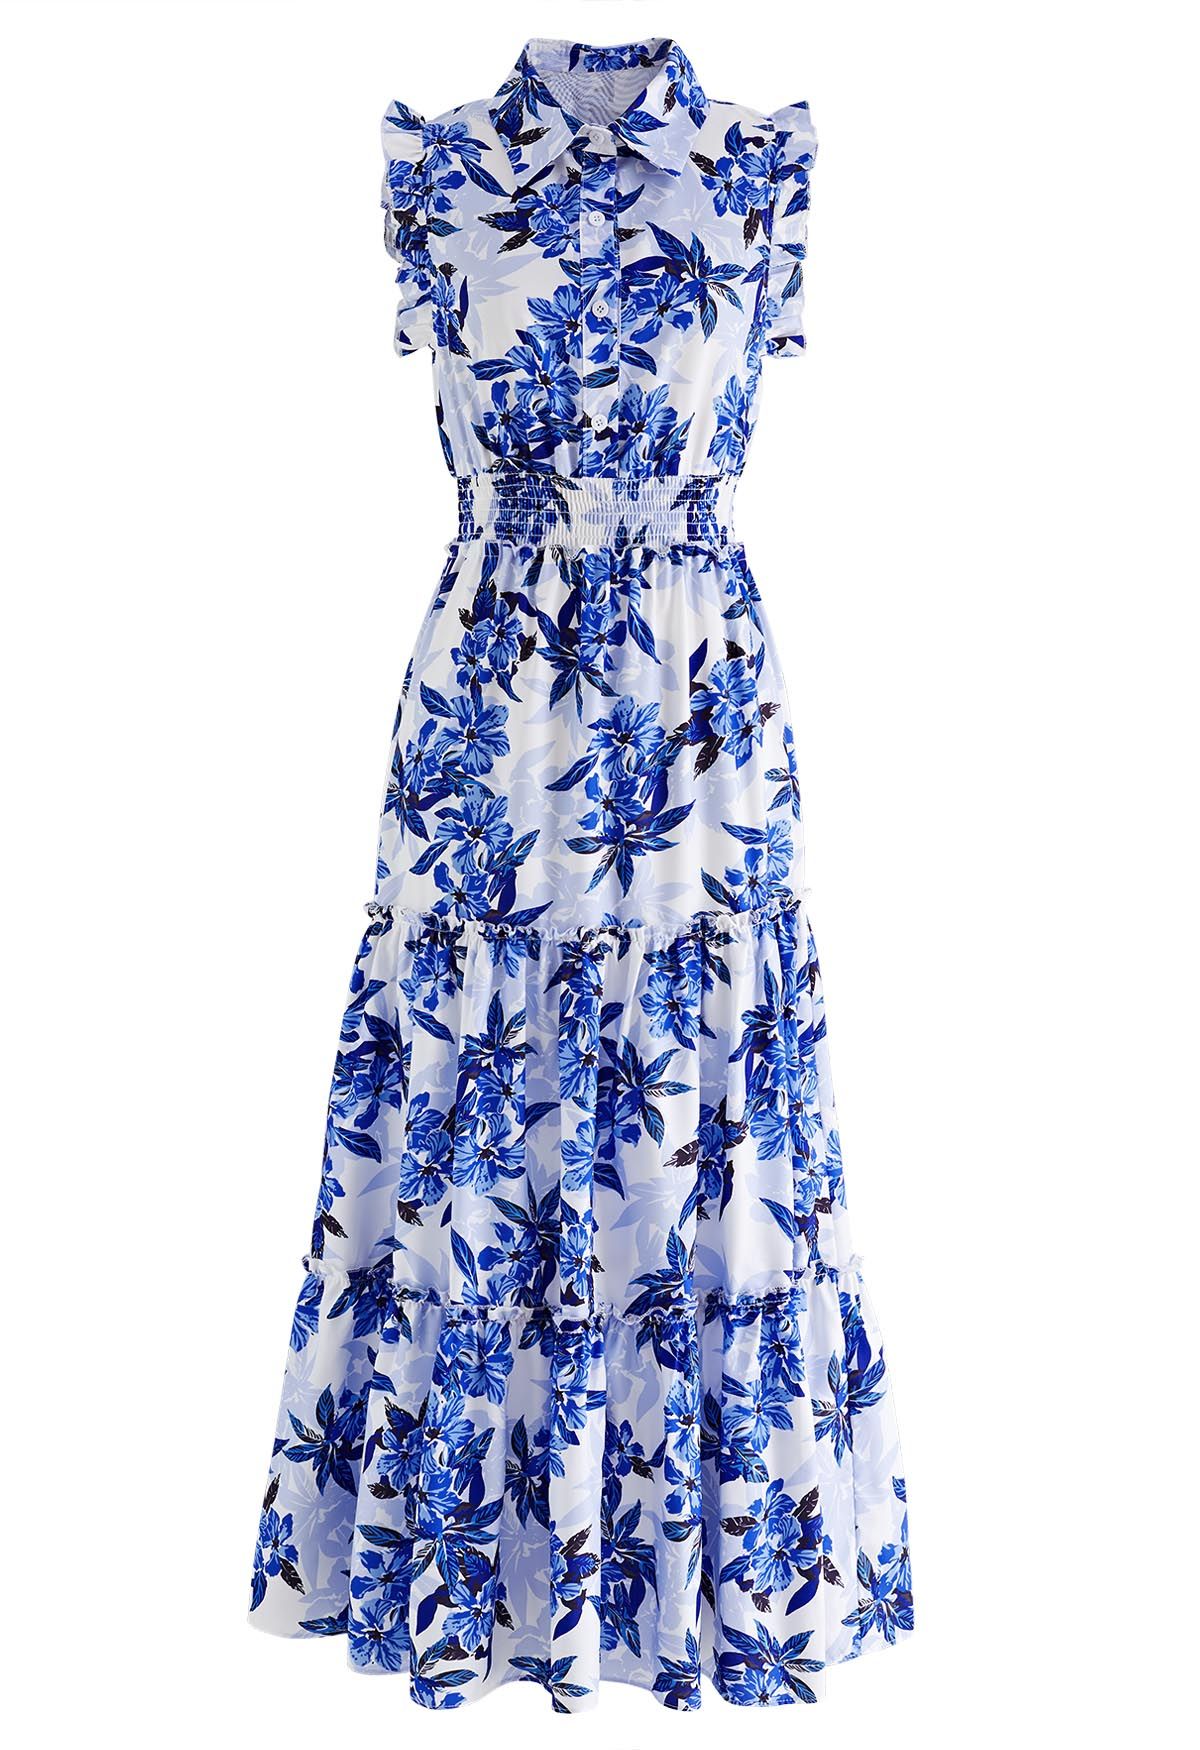 Blue Floral Collared Buttoned Sleeveless Dress